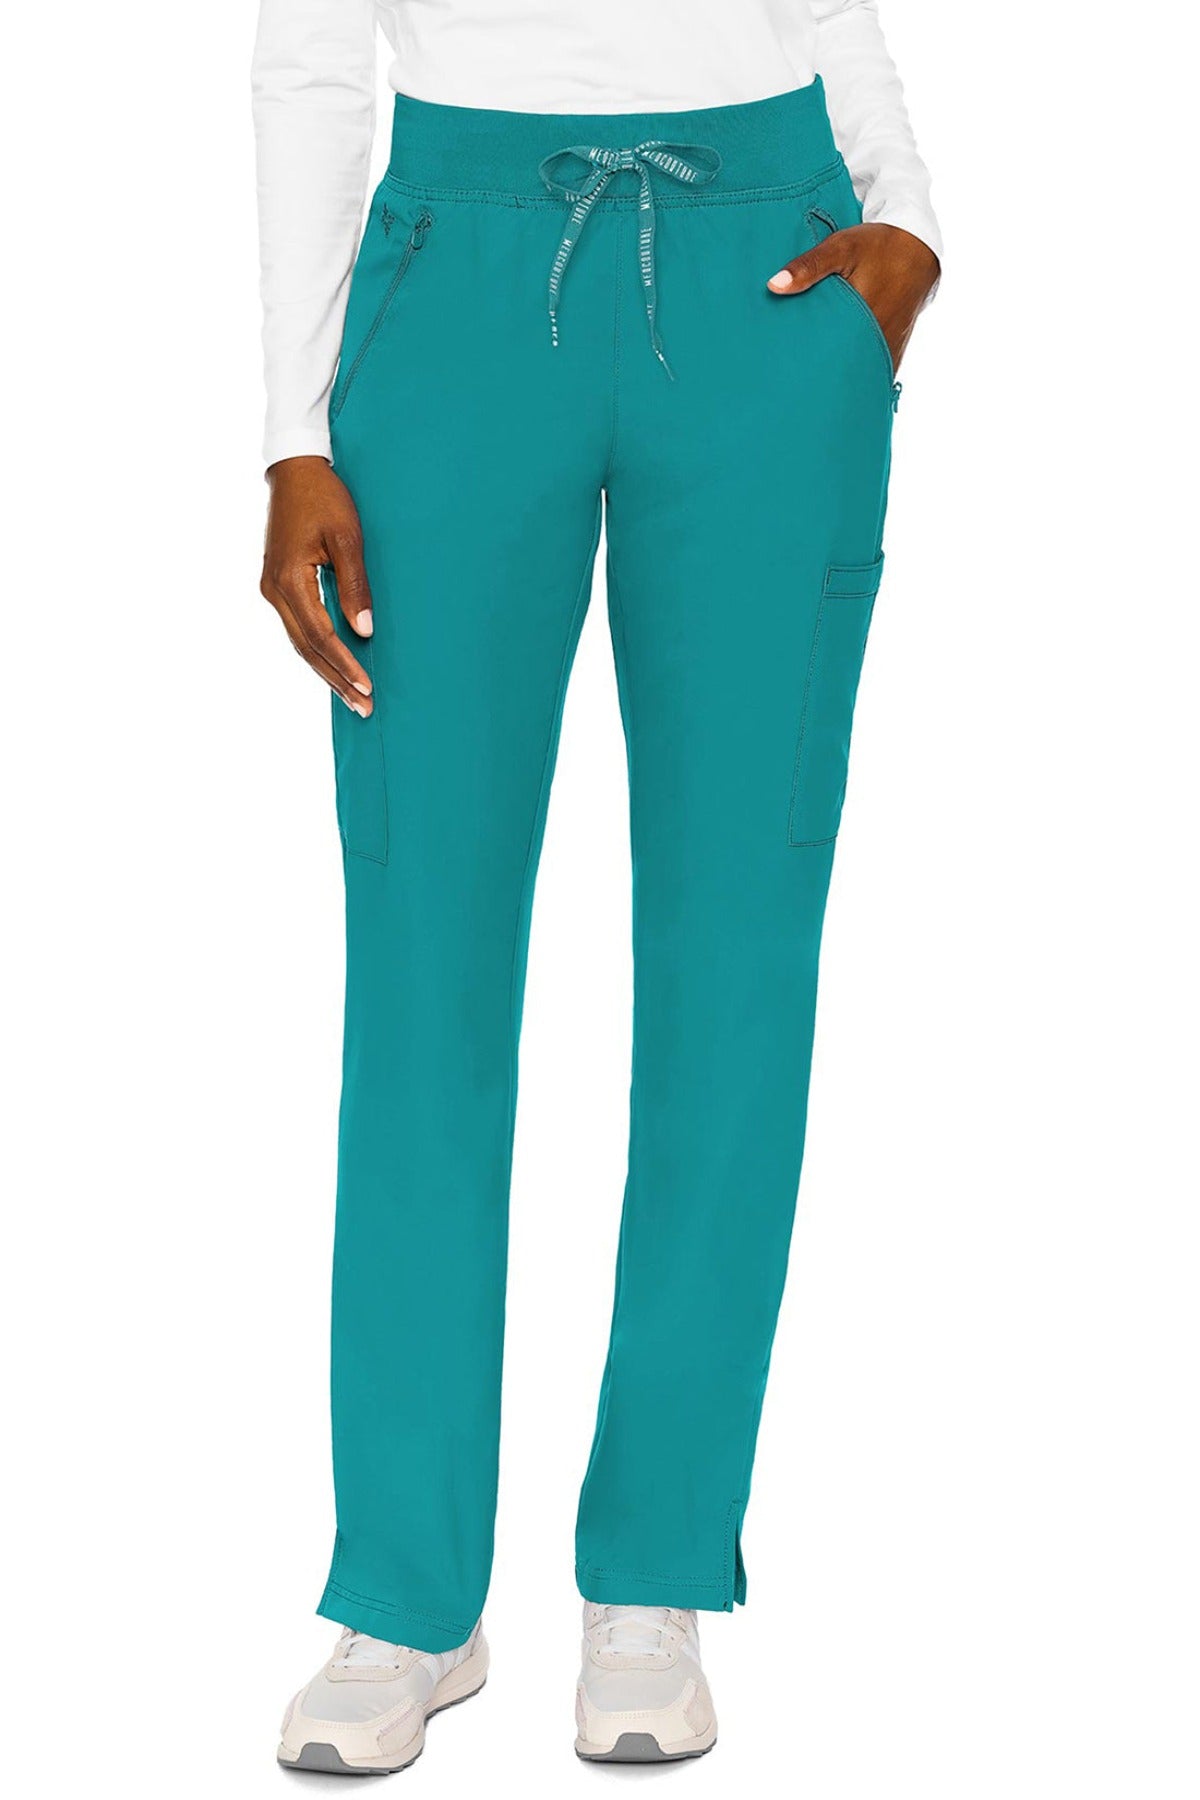 Med Couture Scrub Pants Insight Zipper Pocket Pant in Teal at Parker's Clothing and Shoes